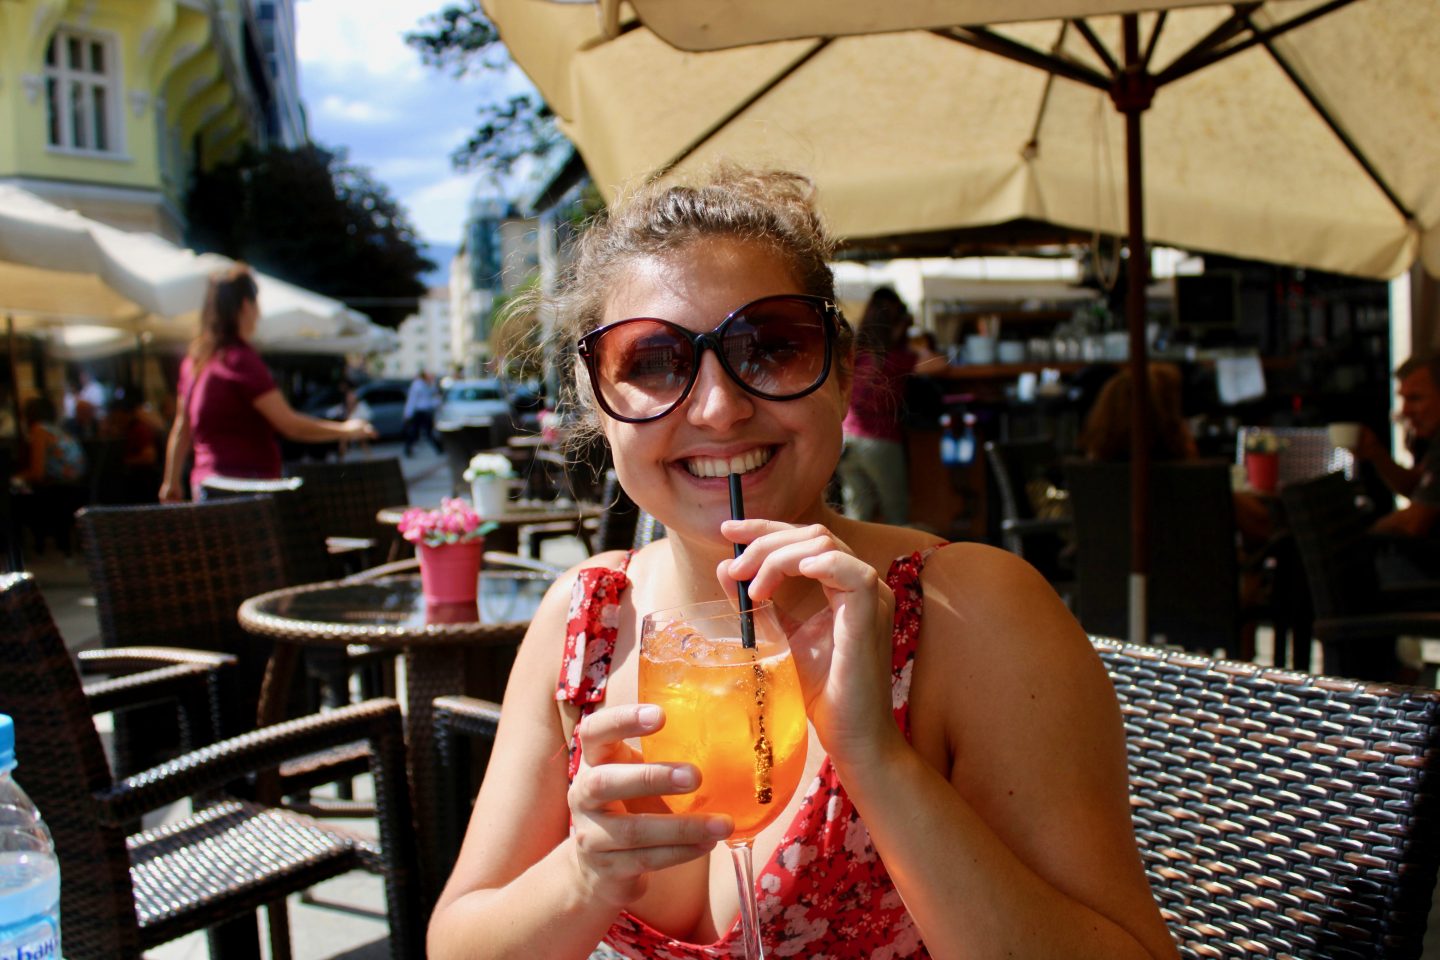 sofia city break: Nell in red floral dress wearing sunglasses and sipping an aperol spritz 